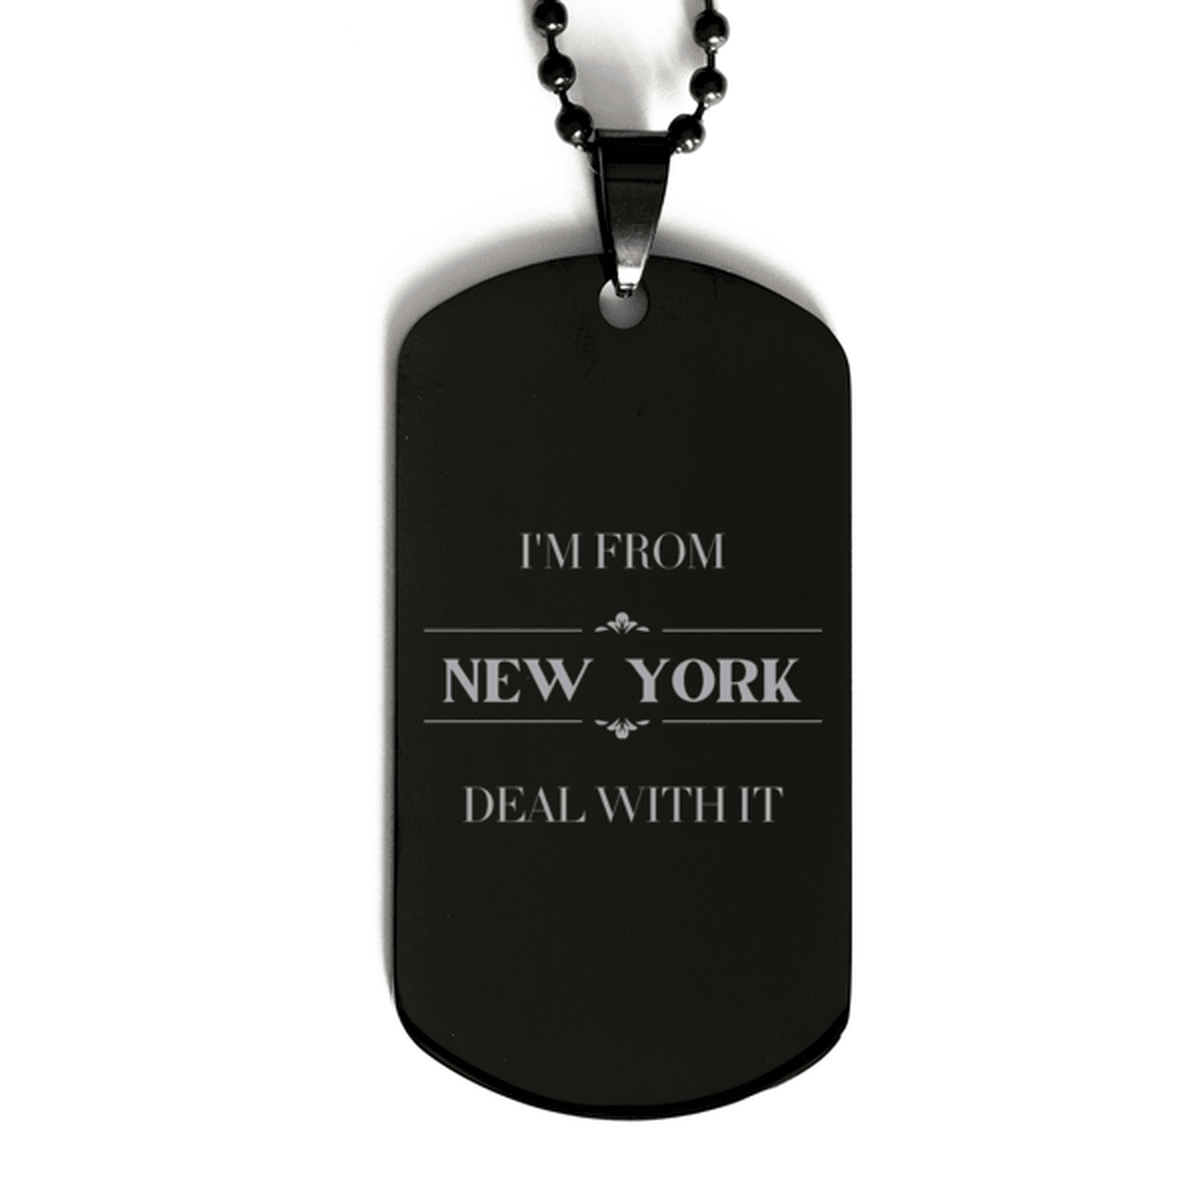 I'm from New York, Deal with it, Proud New York State Gifts, New York Black Dog Tag Gift Idea, Christmas Gifts for New York People, Coworkers, Colleague - Mallard Moon Gift Shop